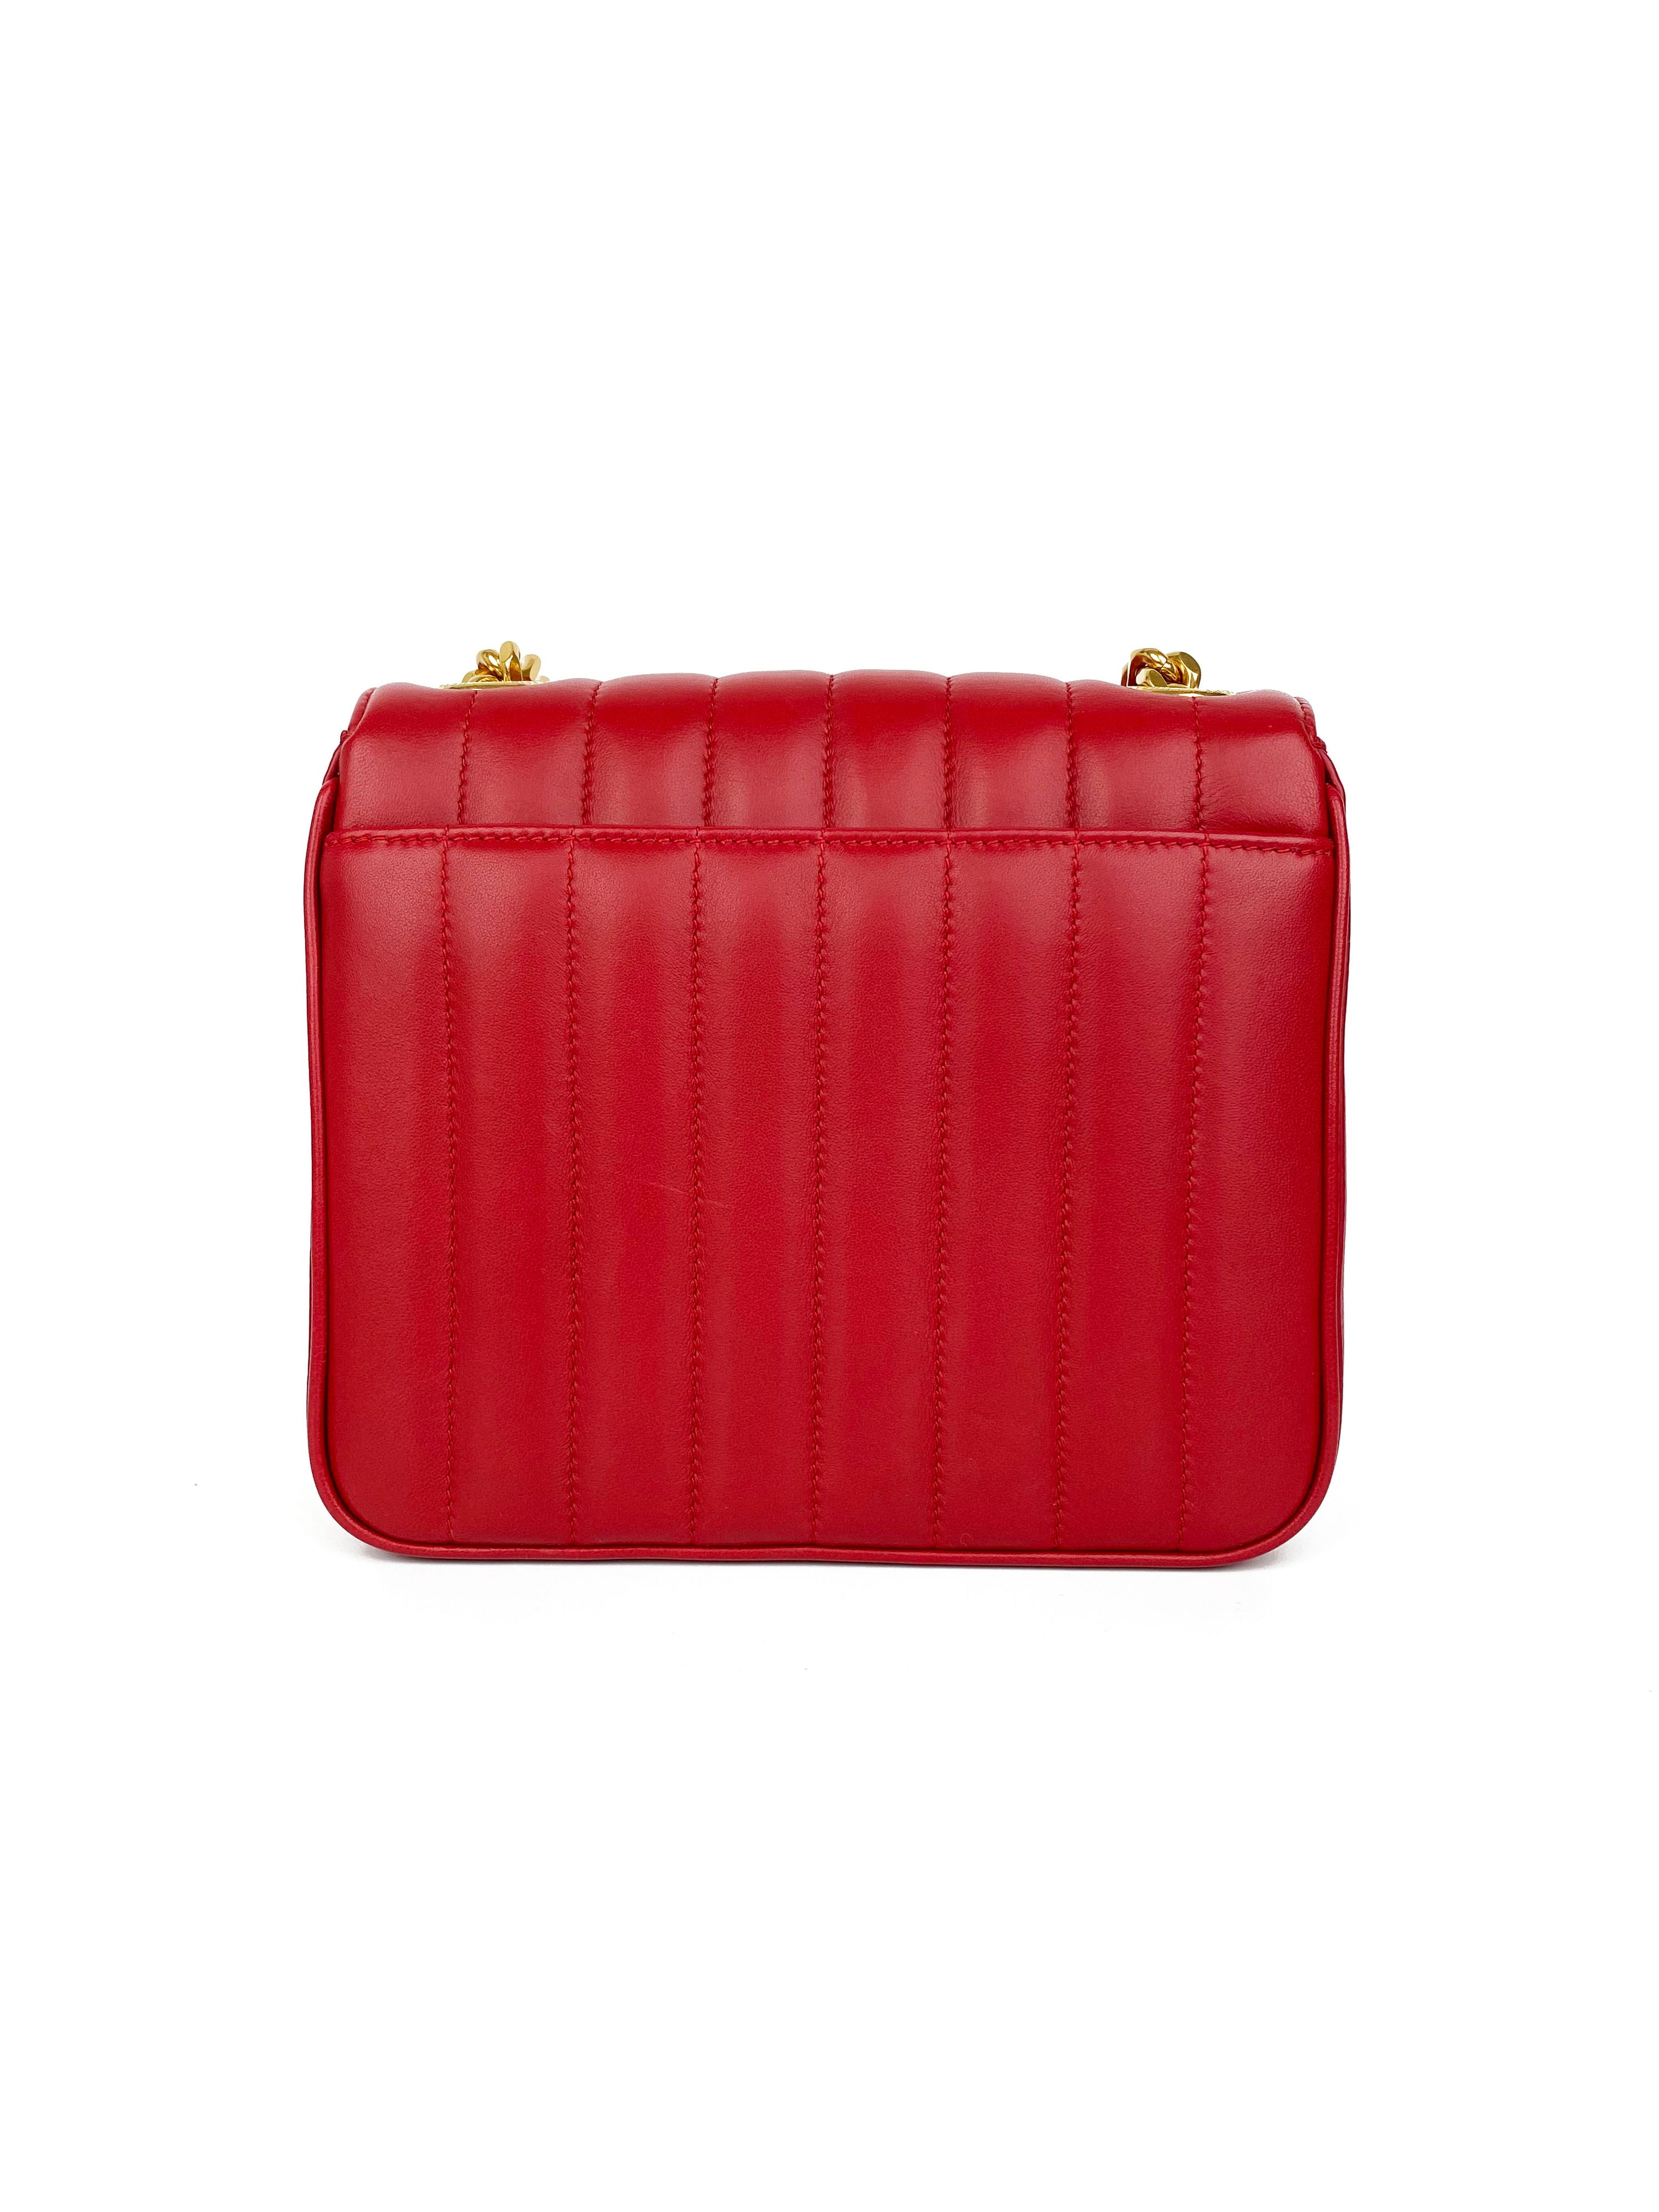 Saint Laurent Small Red Vicky Bag